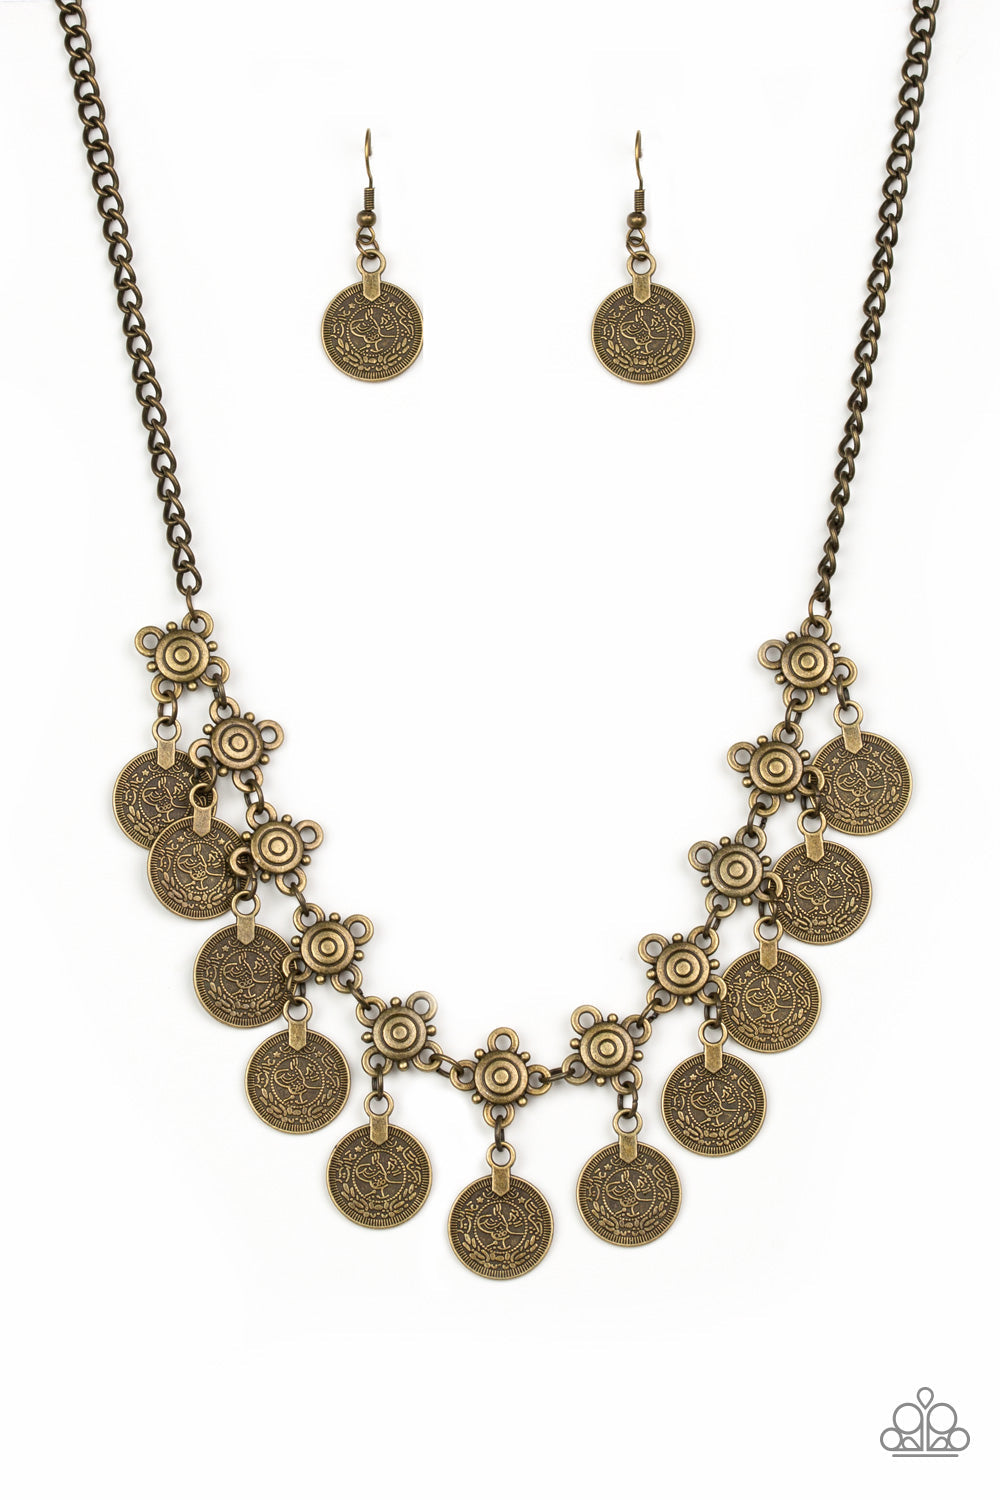 Walk The Plank - Brass Necklace - Paparazzi Accessories - Coin-like discs swing from the bottoms of ornate brass frames, creating a boisterous fringe below the collar. Necklace features an adjustable clasp closure.